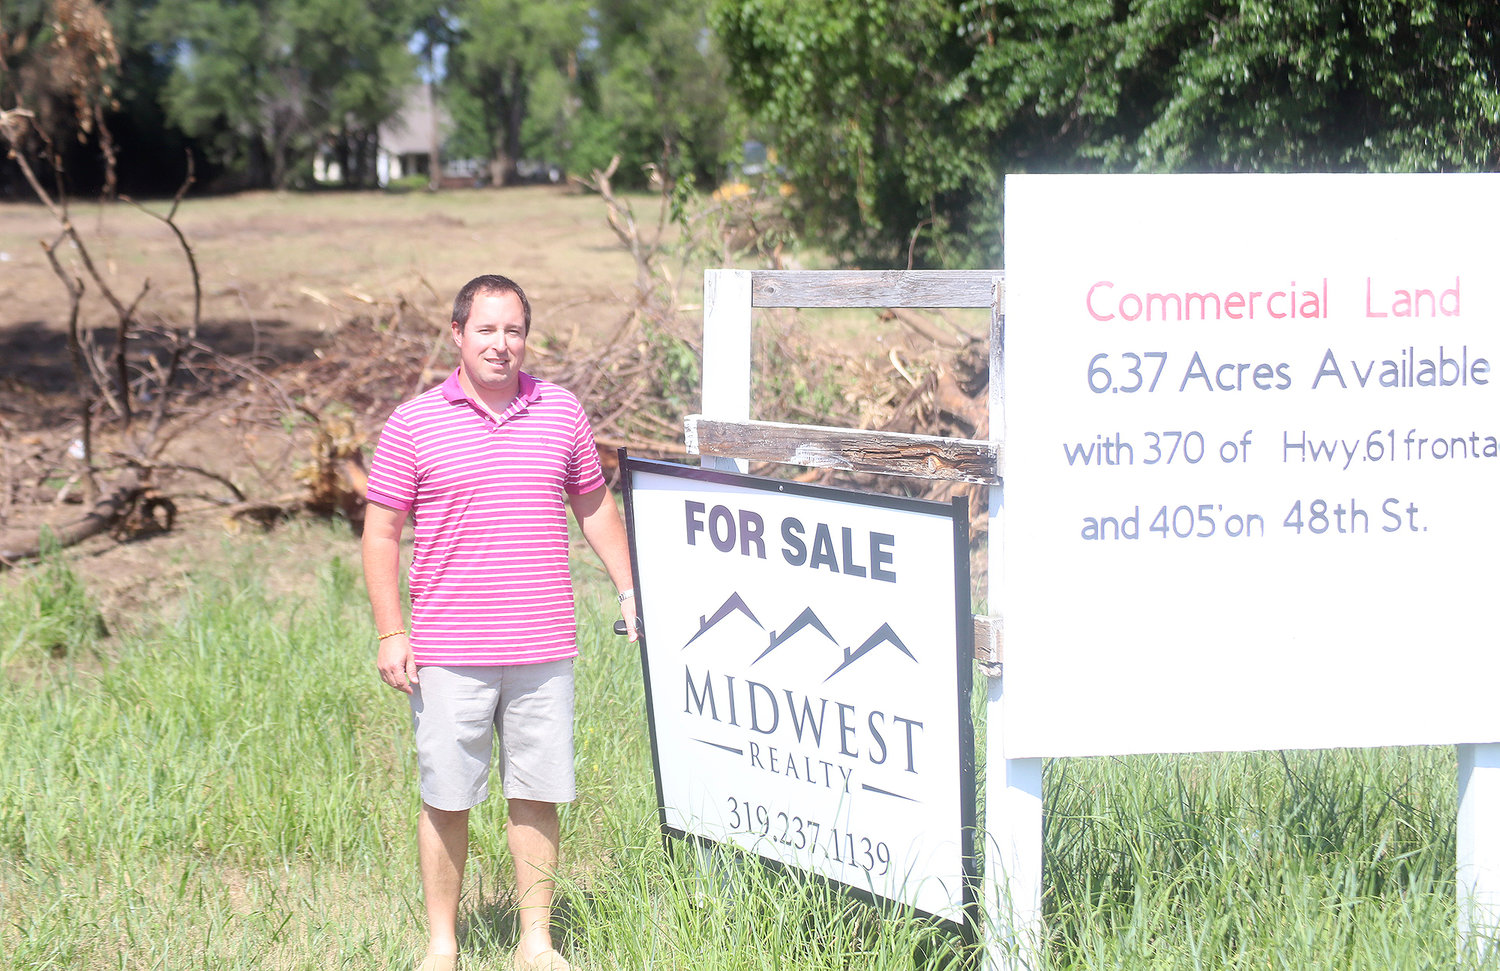 Midwest Realty Group President, Ryan Nagrocki, is working on property development at the old Fort Madison Drive-In Theater site on 48th Street. Nagrocki said he is actively engaged in conversations with potential customers for the site.